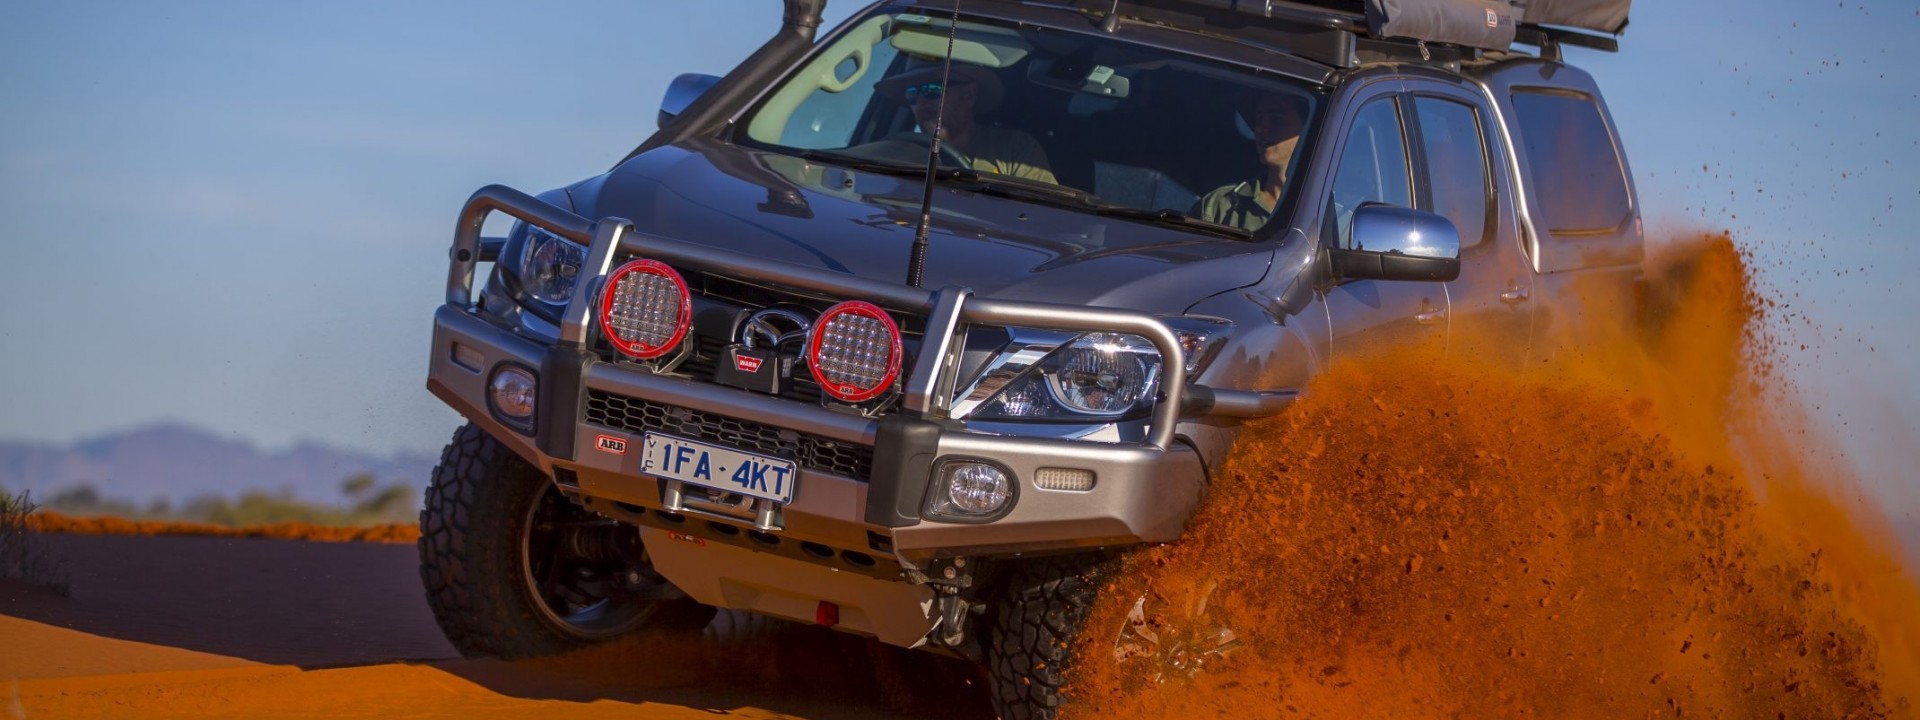 4WD Accessories - ARB & Four Accessories